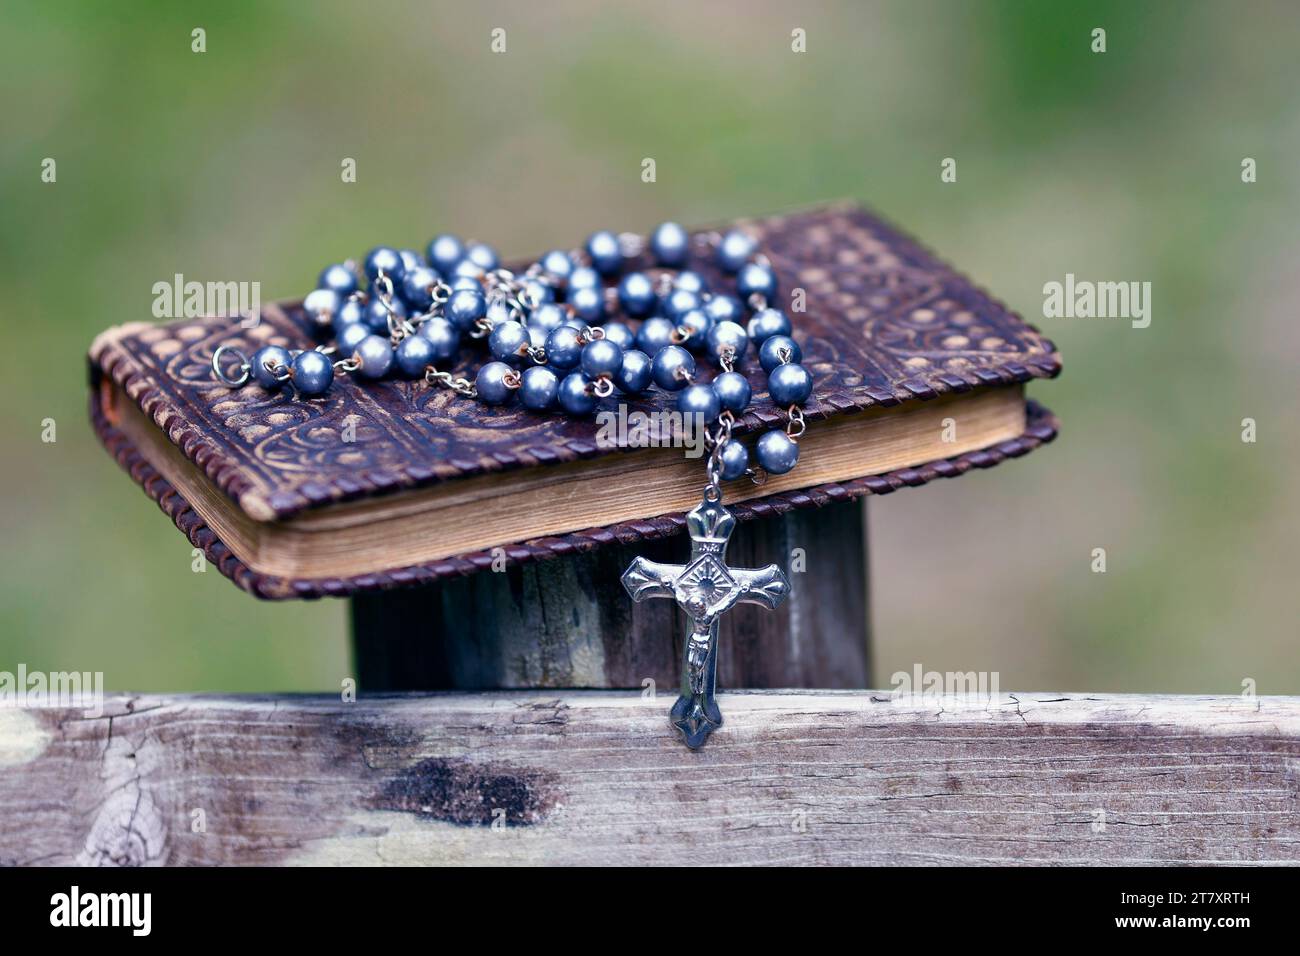 Bible and Catholic rosary beads on wood, Les Contamines, Haute-Savoie, France, Europe Stock Photo